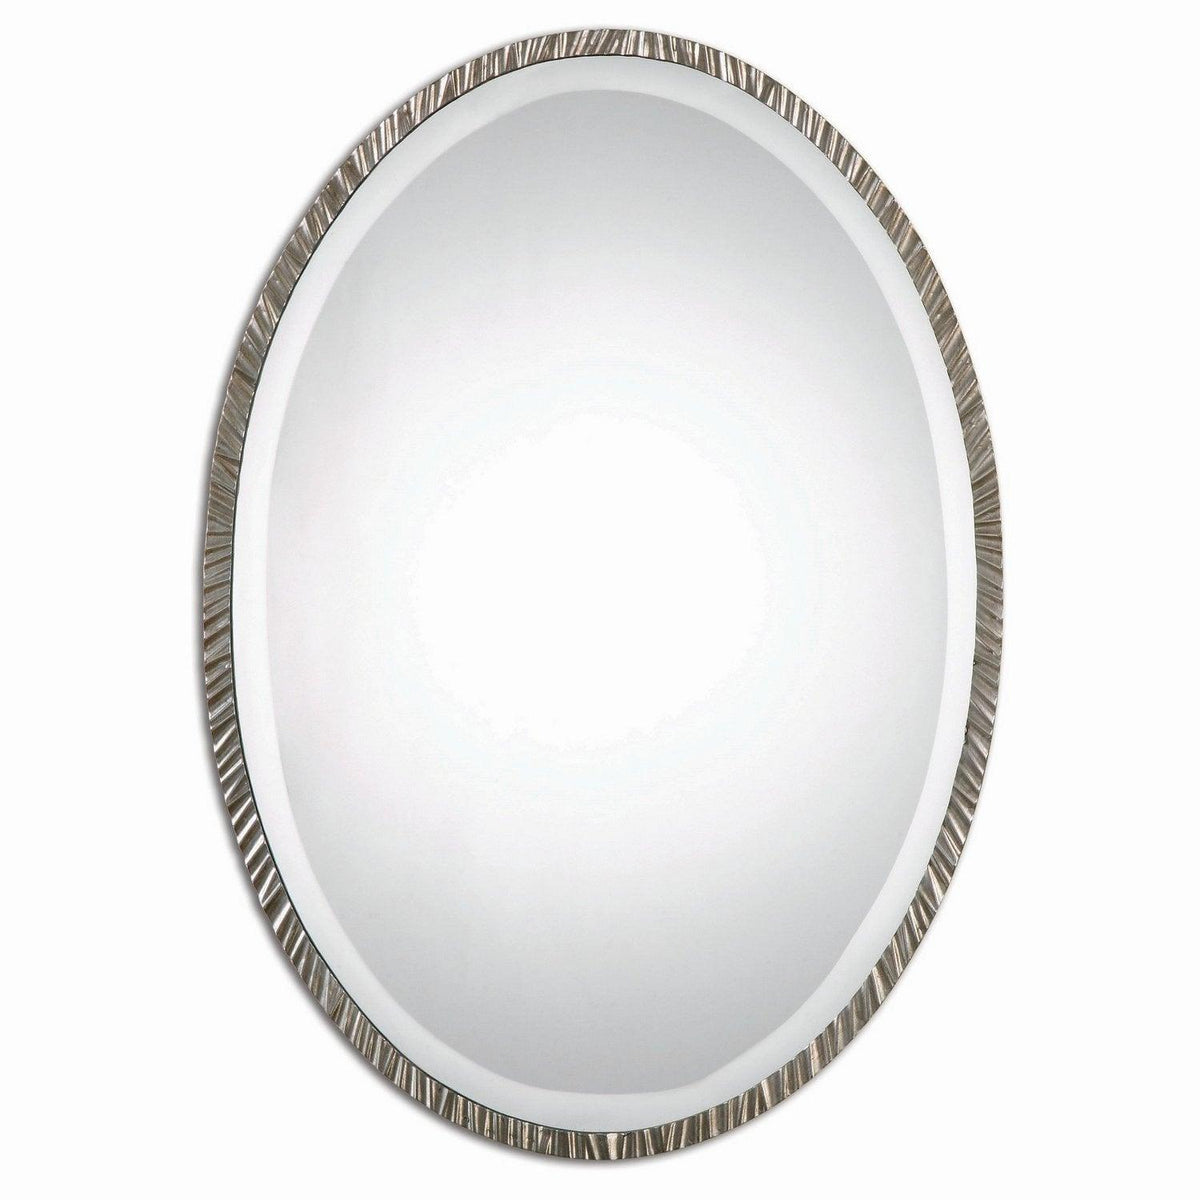 The Uttermost - Annadel Oval Mirror - 12924 | Montreal Lighting & Hardware